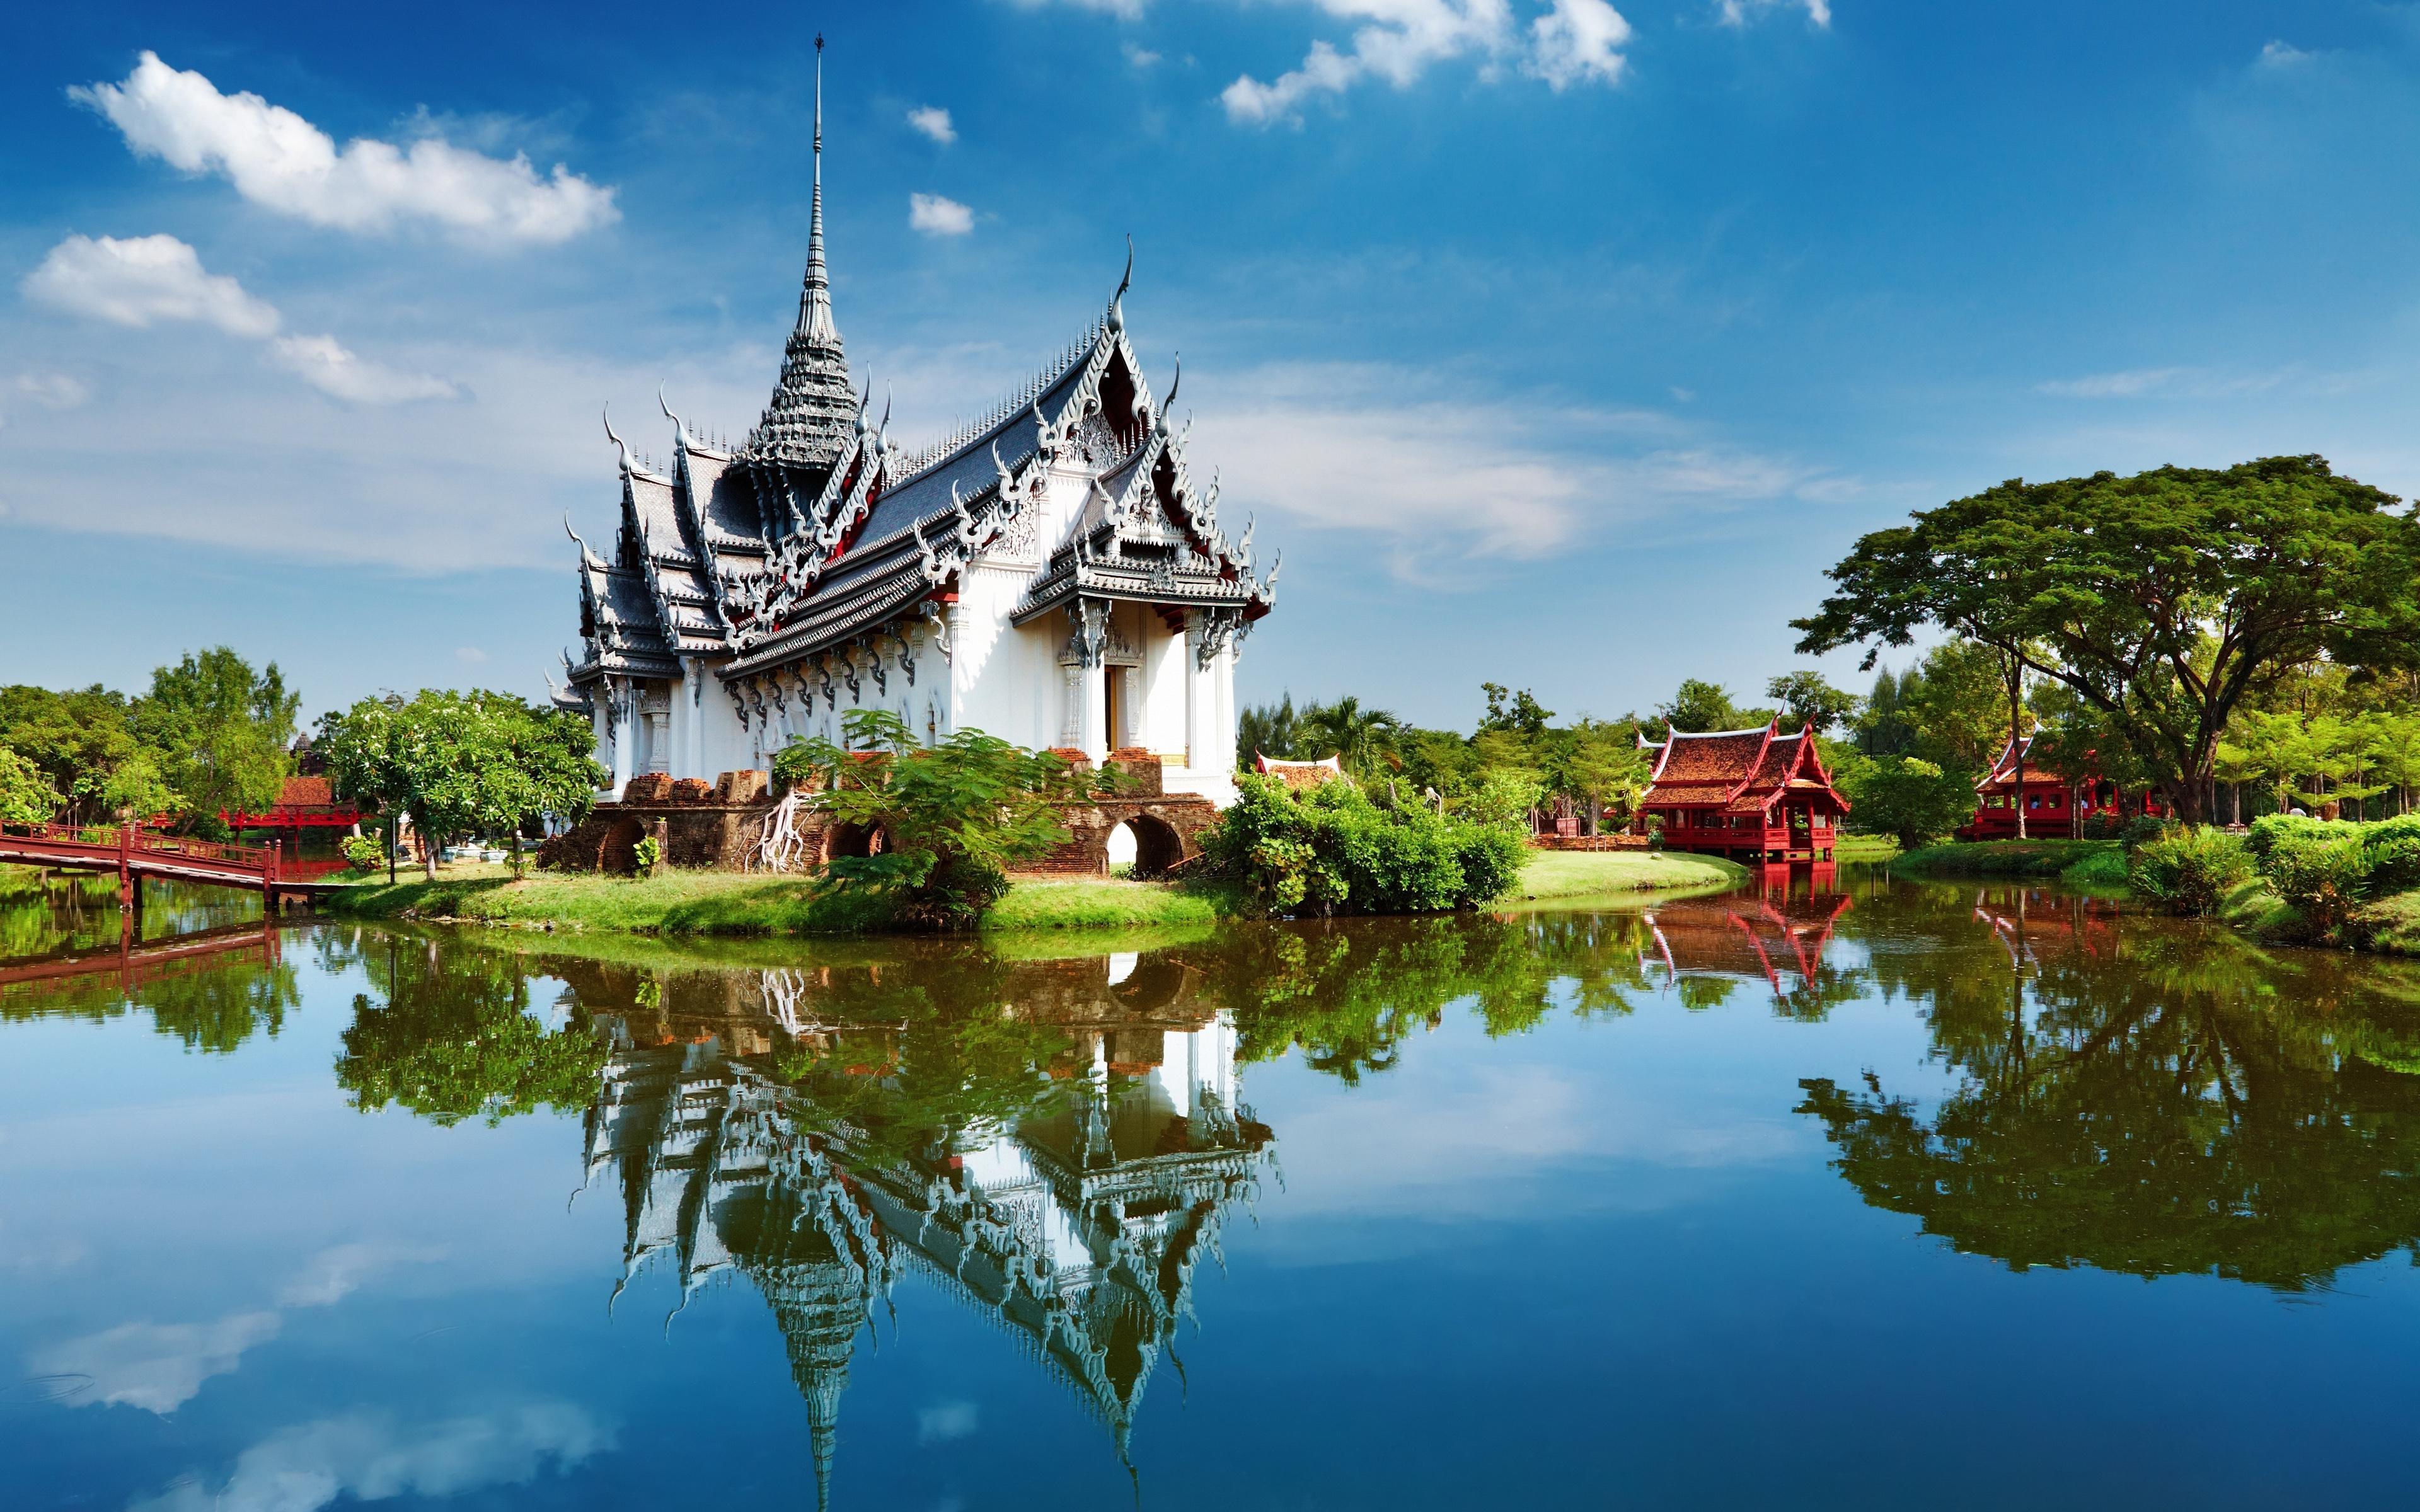 Download wallpaper 4k, Bangkok, temple, summer, lake, park, Thailand, Asia for desktop with resolution 3840x2400. High Quality HD picture wallpaper